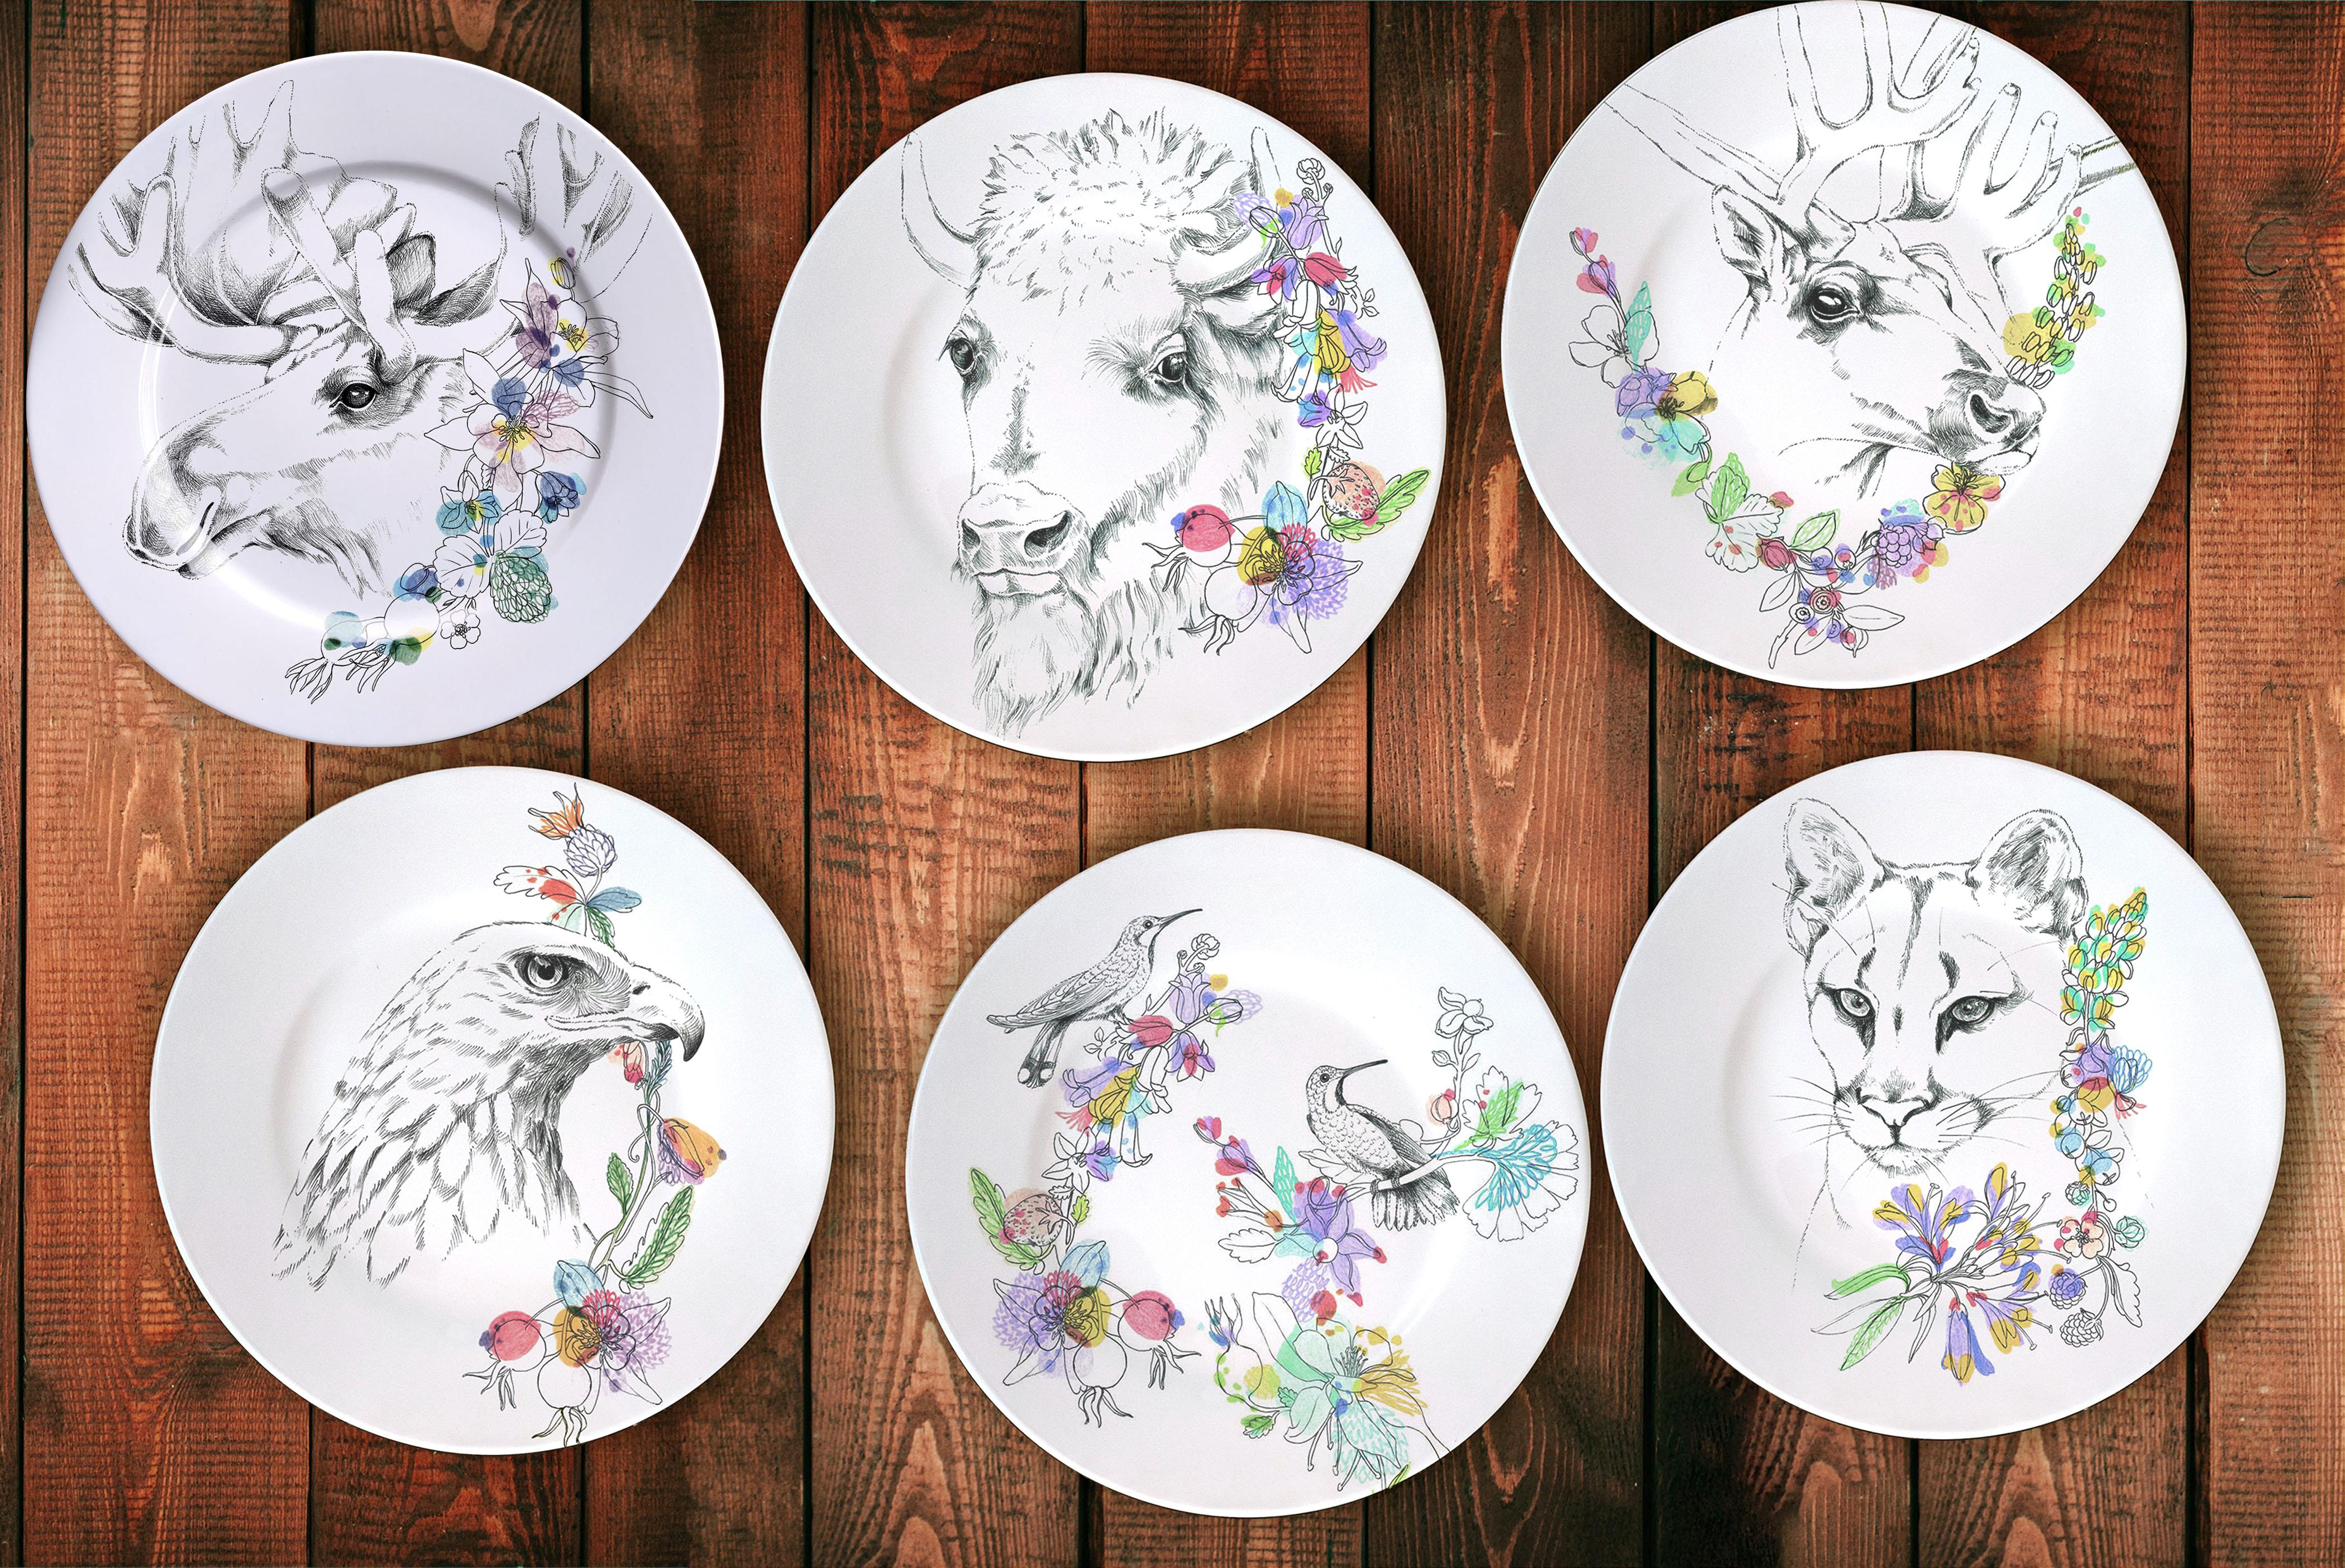 The typical animals of the American woods are gently painted on these dinner plates, with soft black tones and they are surrounded by a delicate and intriguing mix of wild flowers and leaves reinterpreted in a fresh and poetic color way. These